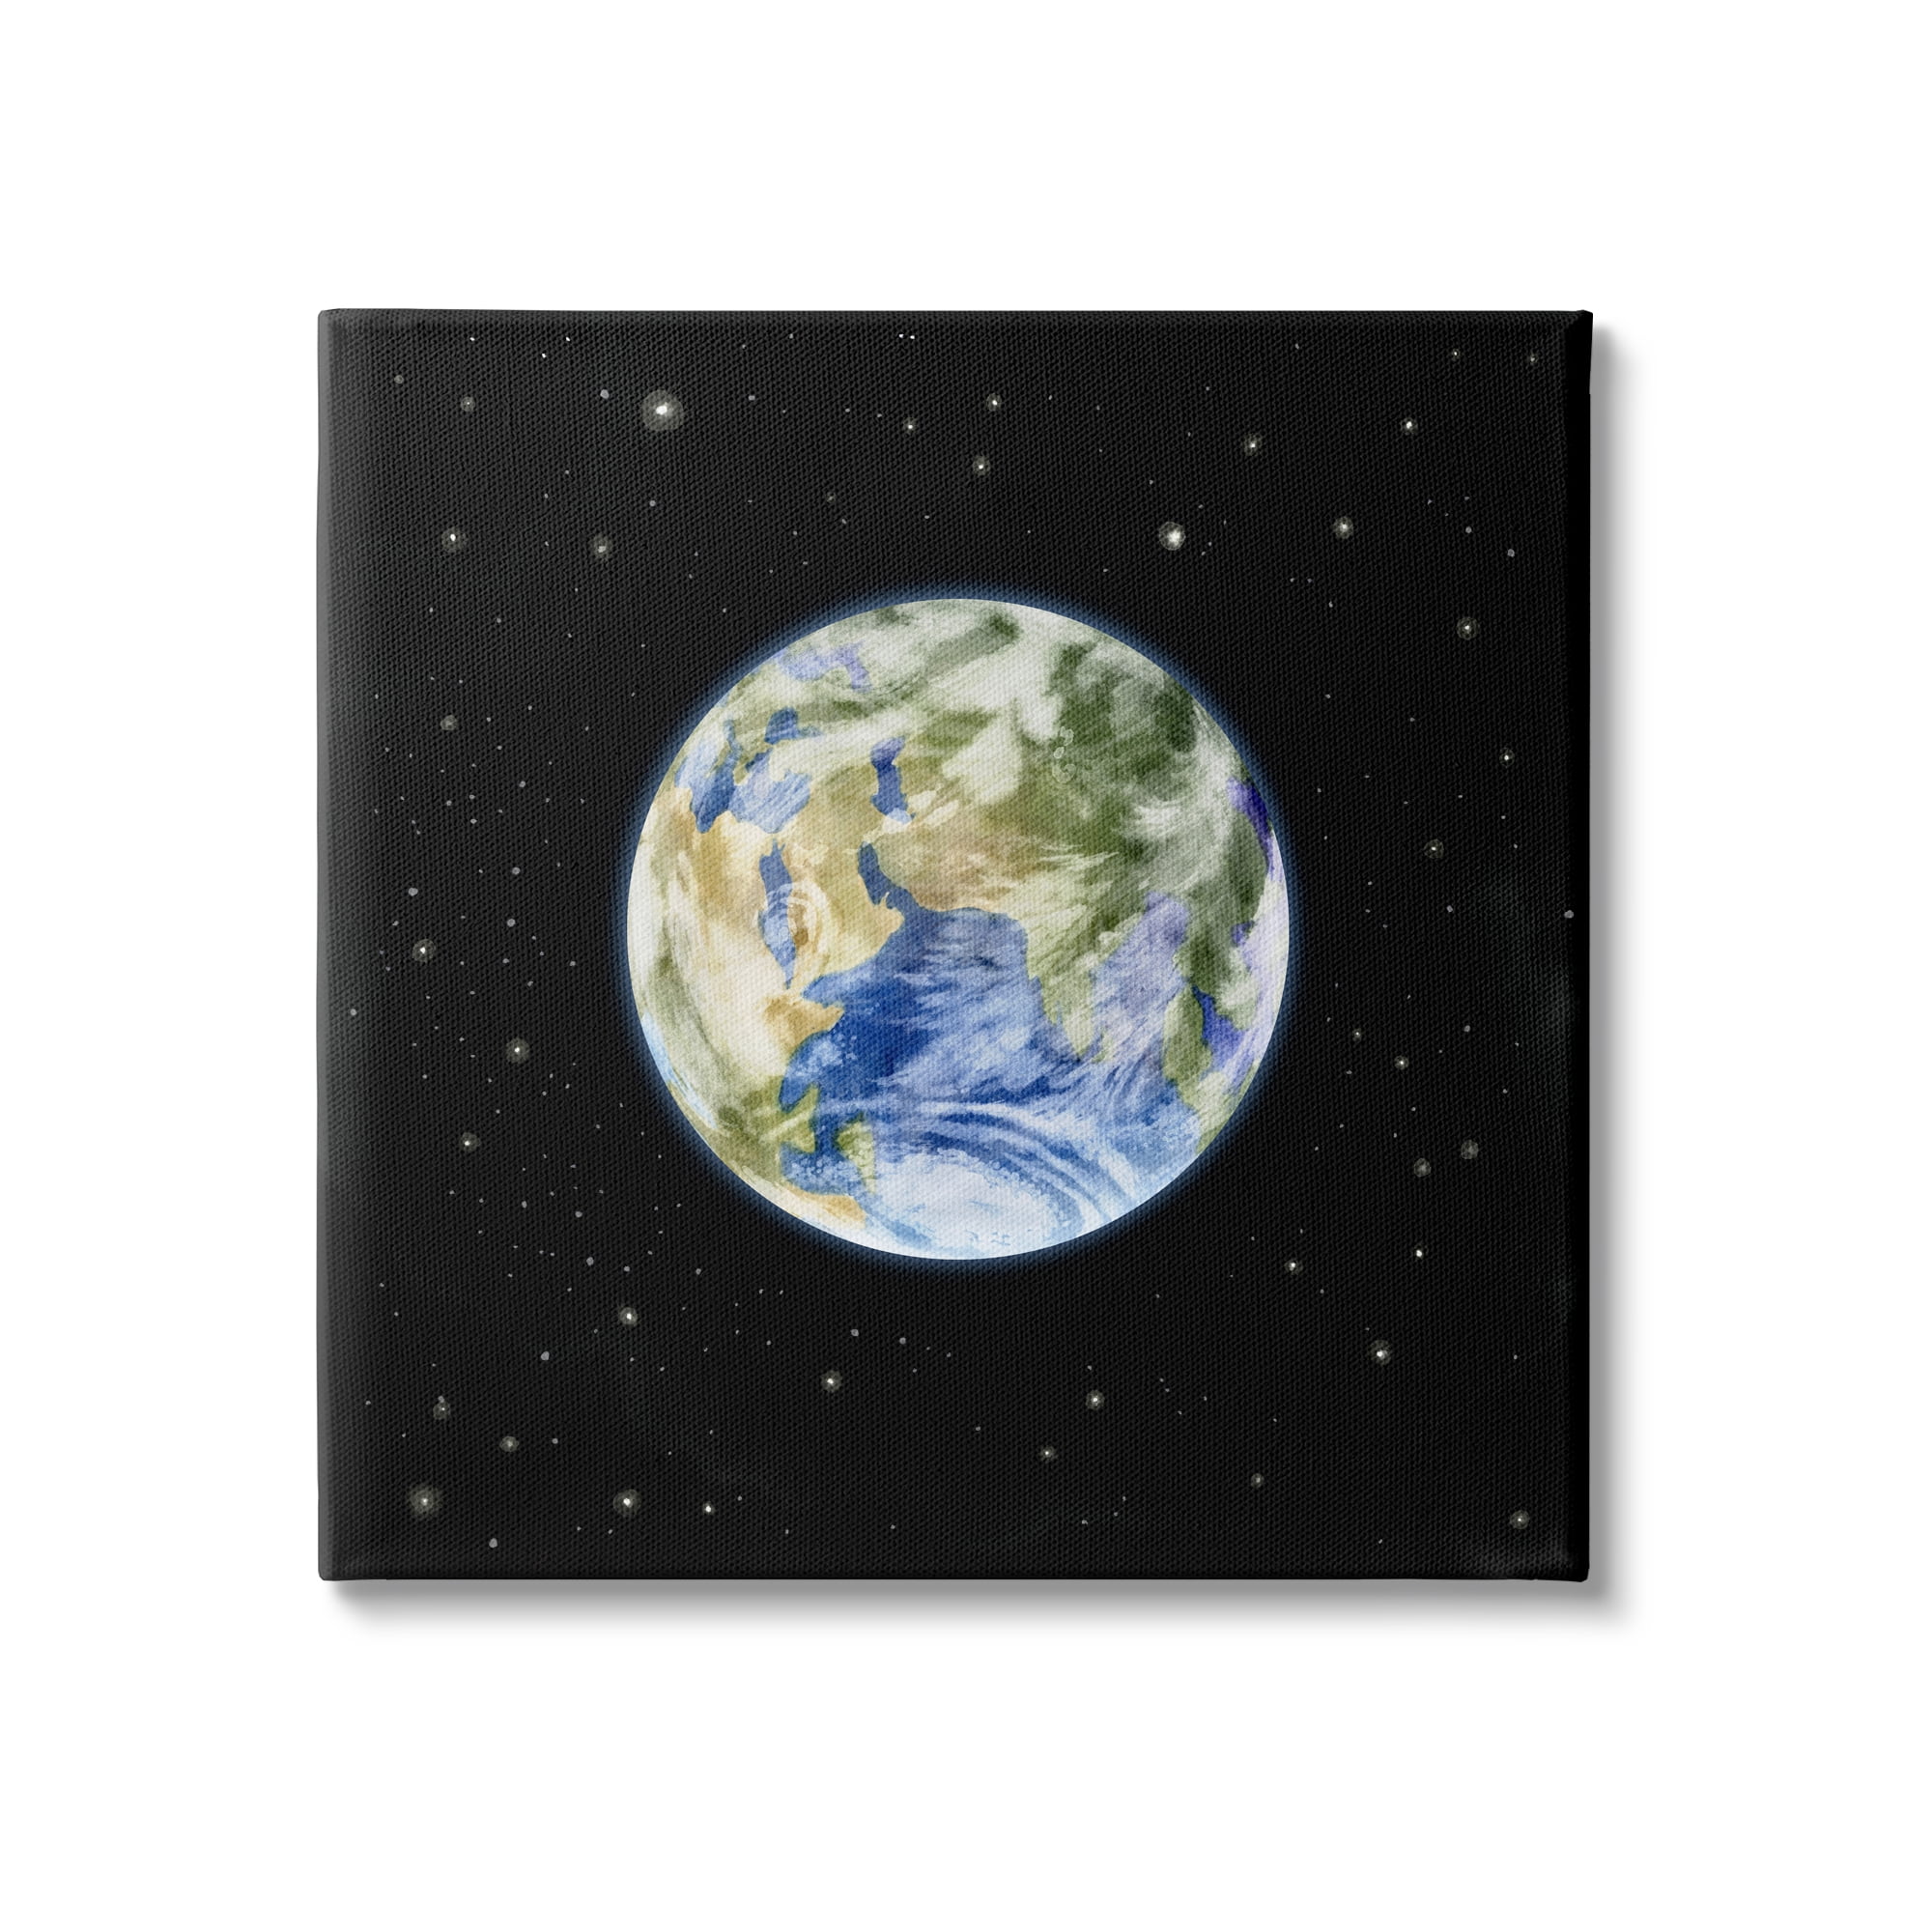 Details about   Cosmos Planet Big Solar System Art Poster 36x24" 